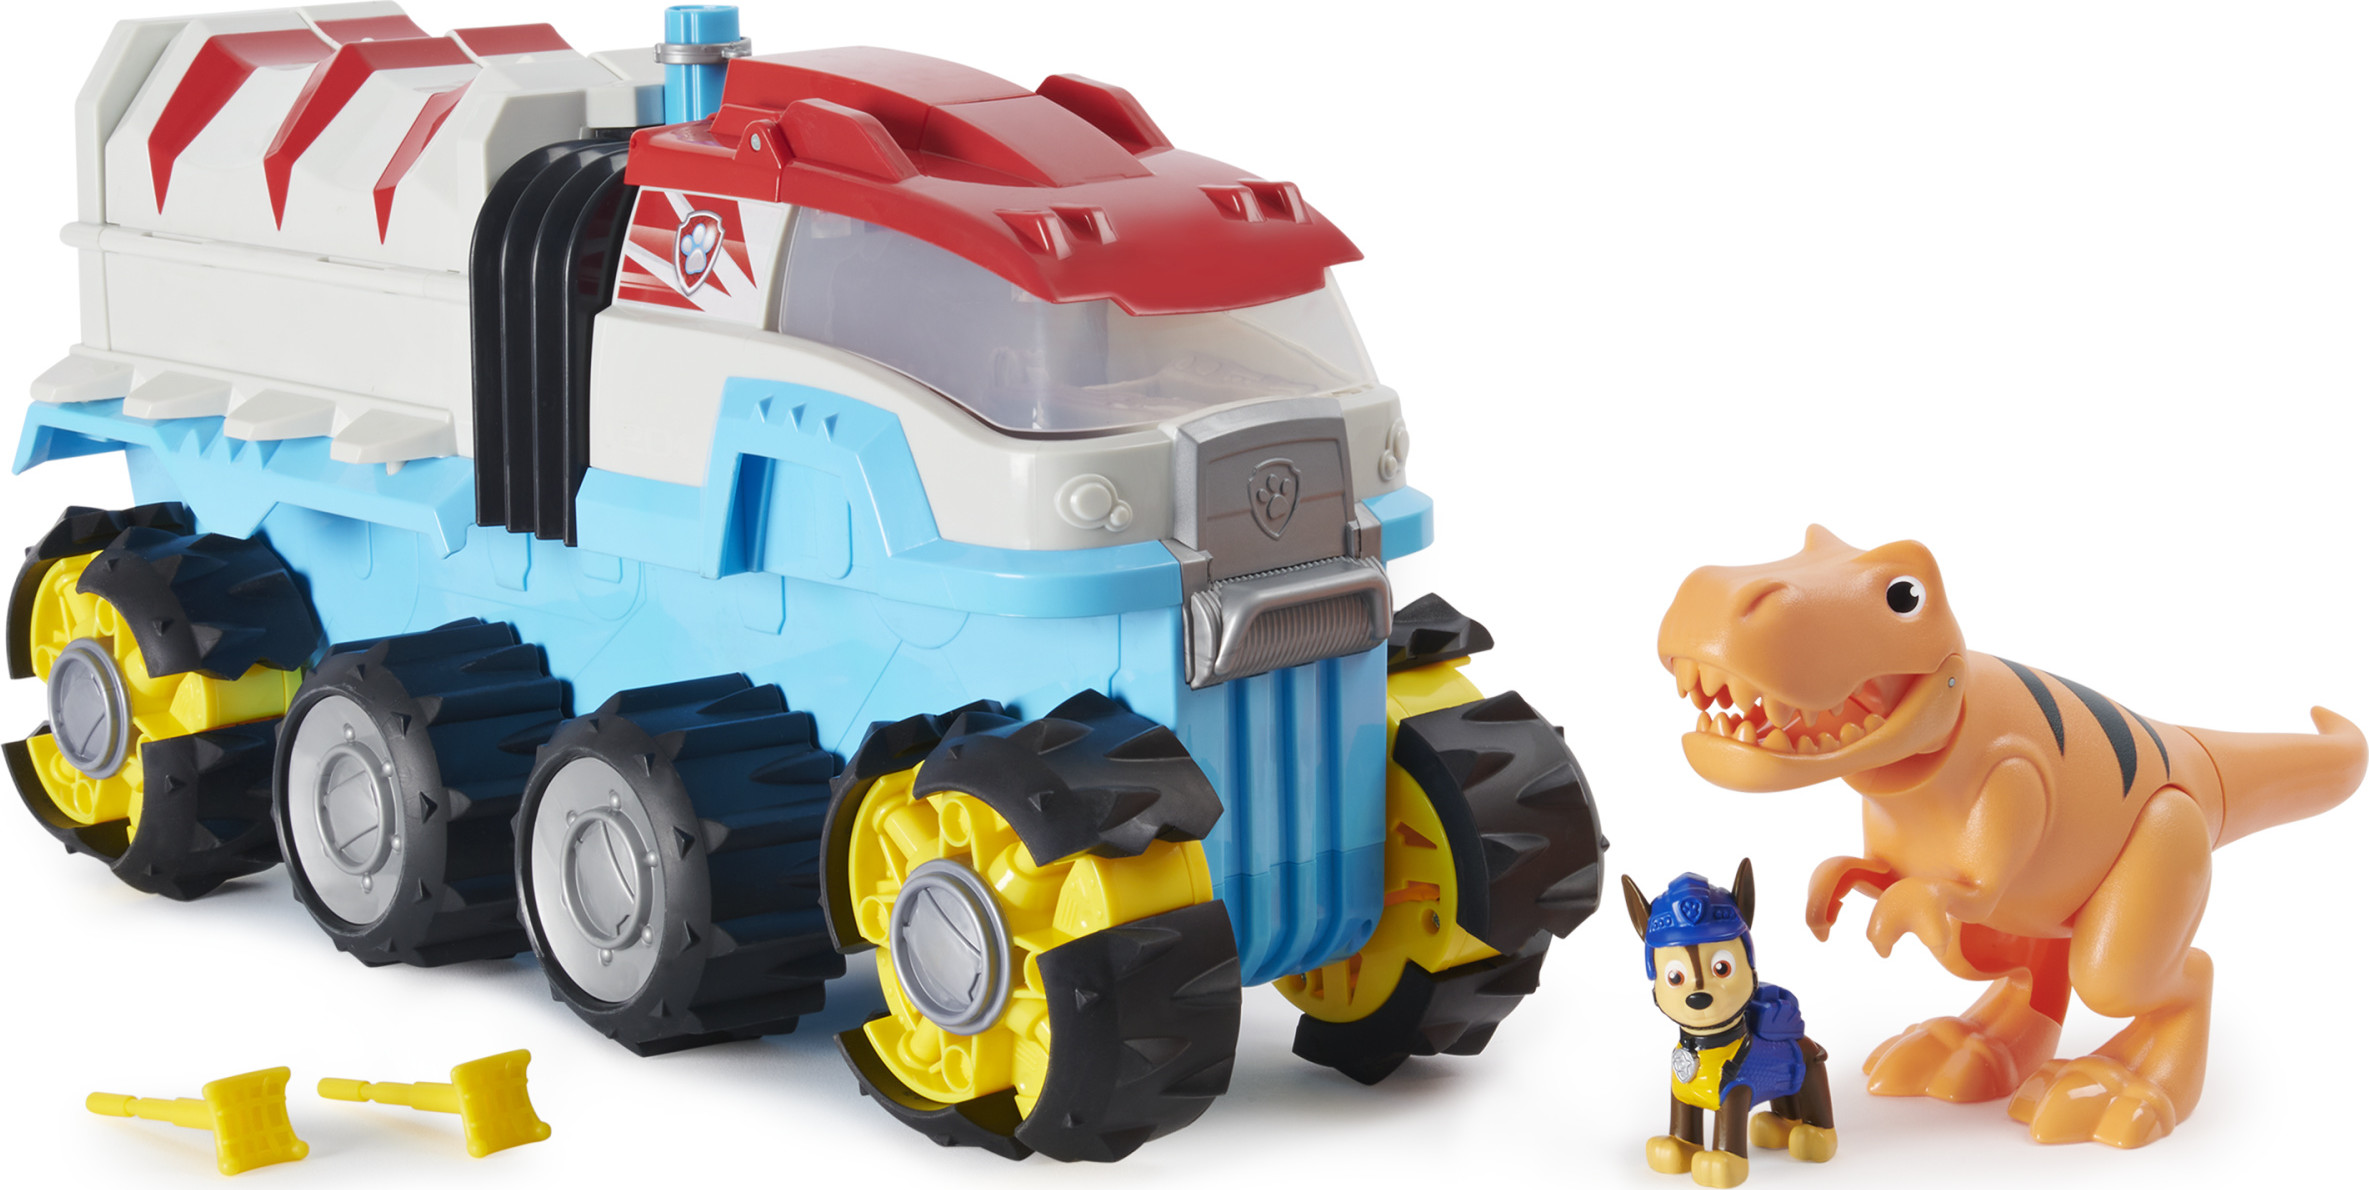 Paw Patrol, Dino Rescue Dino Patroller Motorized Team Vehicle with Exclusive Chase and T. Rex Toy Figures - image 1 of 9